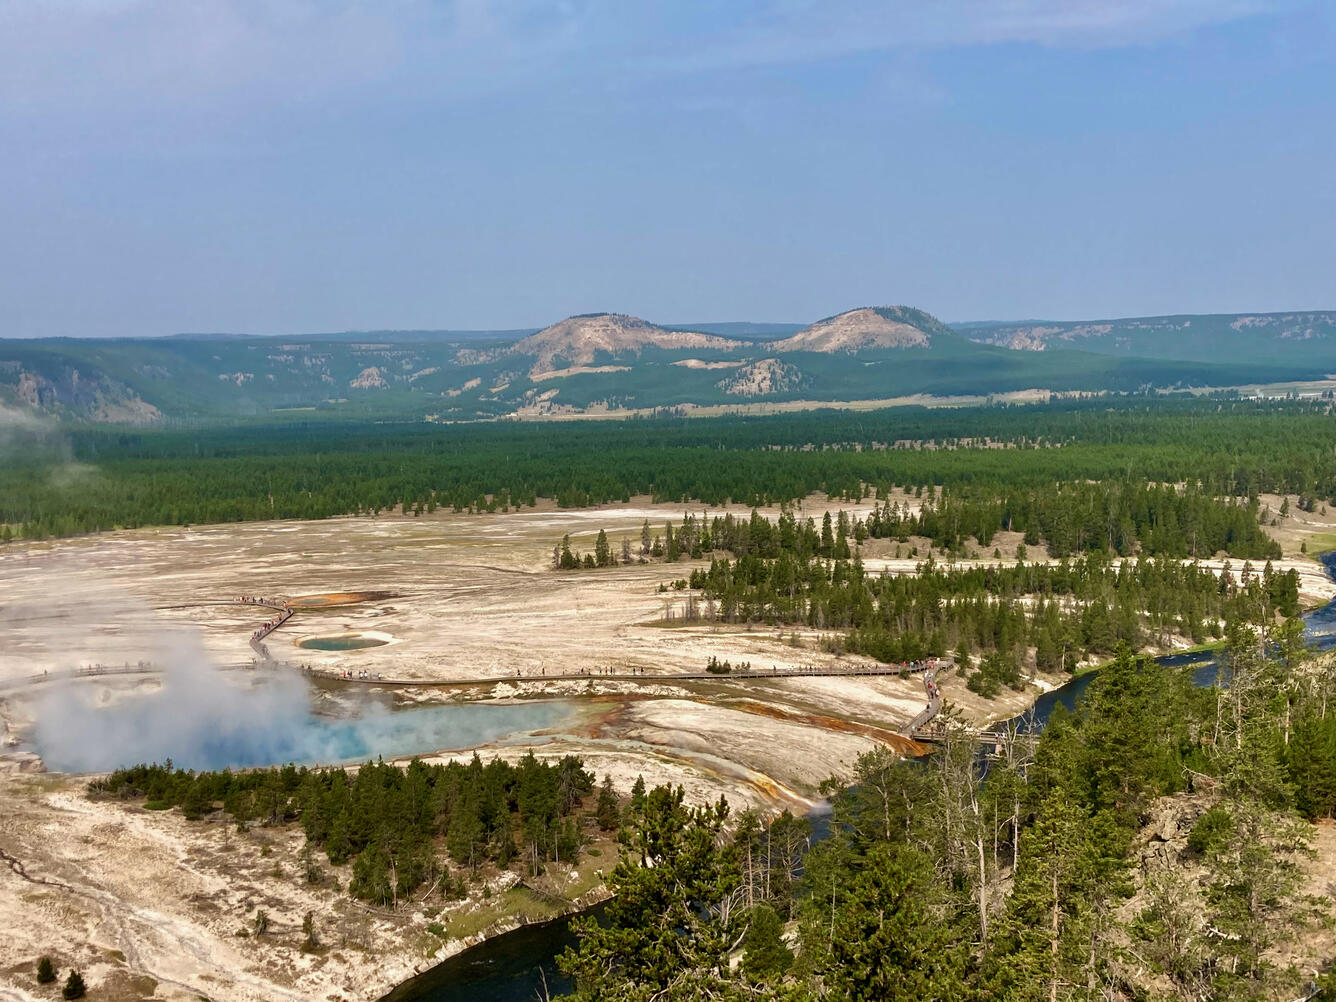 Twin Buttes in Lower Geyser Basin, with Excelsior Geyser of Midway Geyser Basin in the foreground